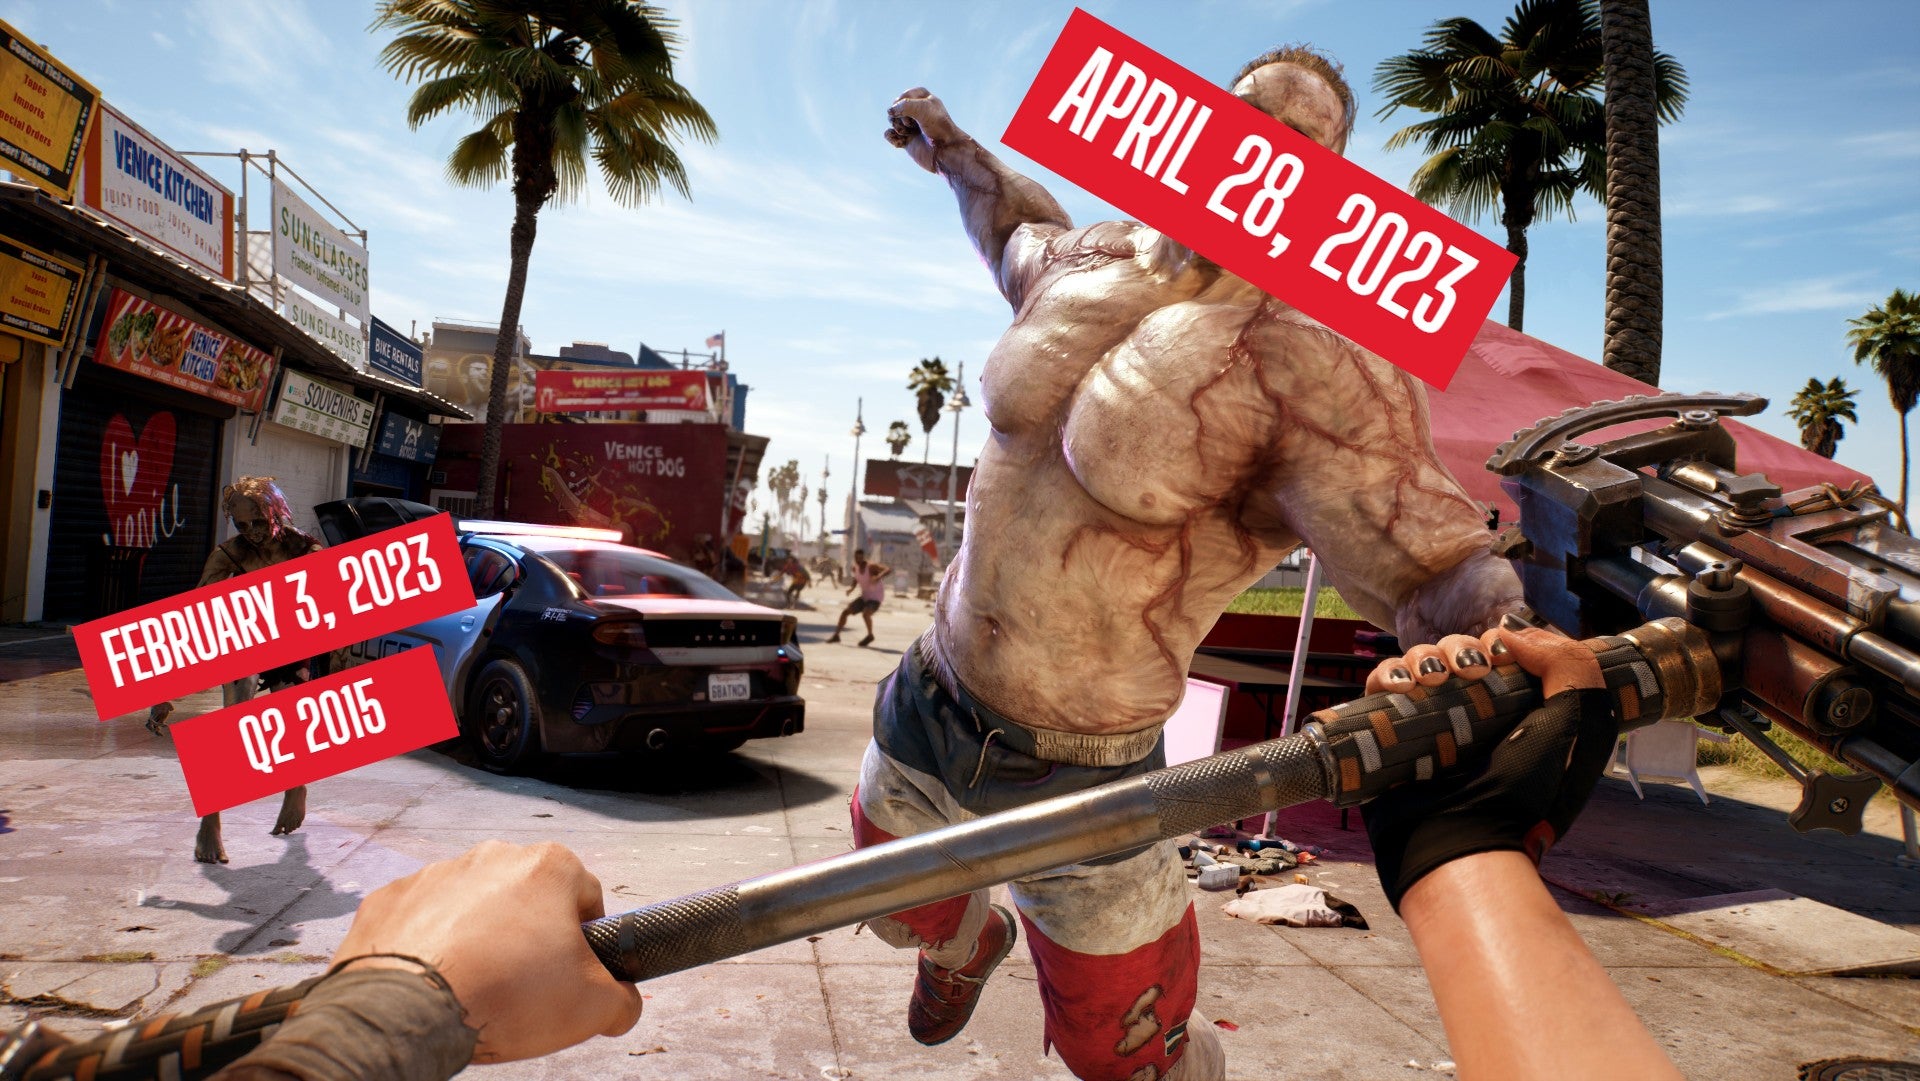 Image for Surprise, Dead Island 2 has been delayed again, with a new showcase announced